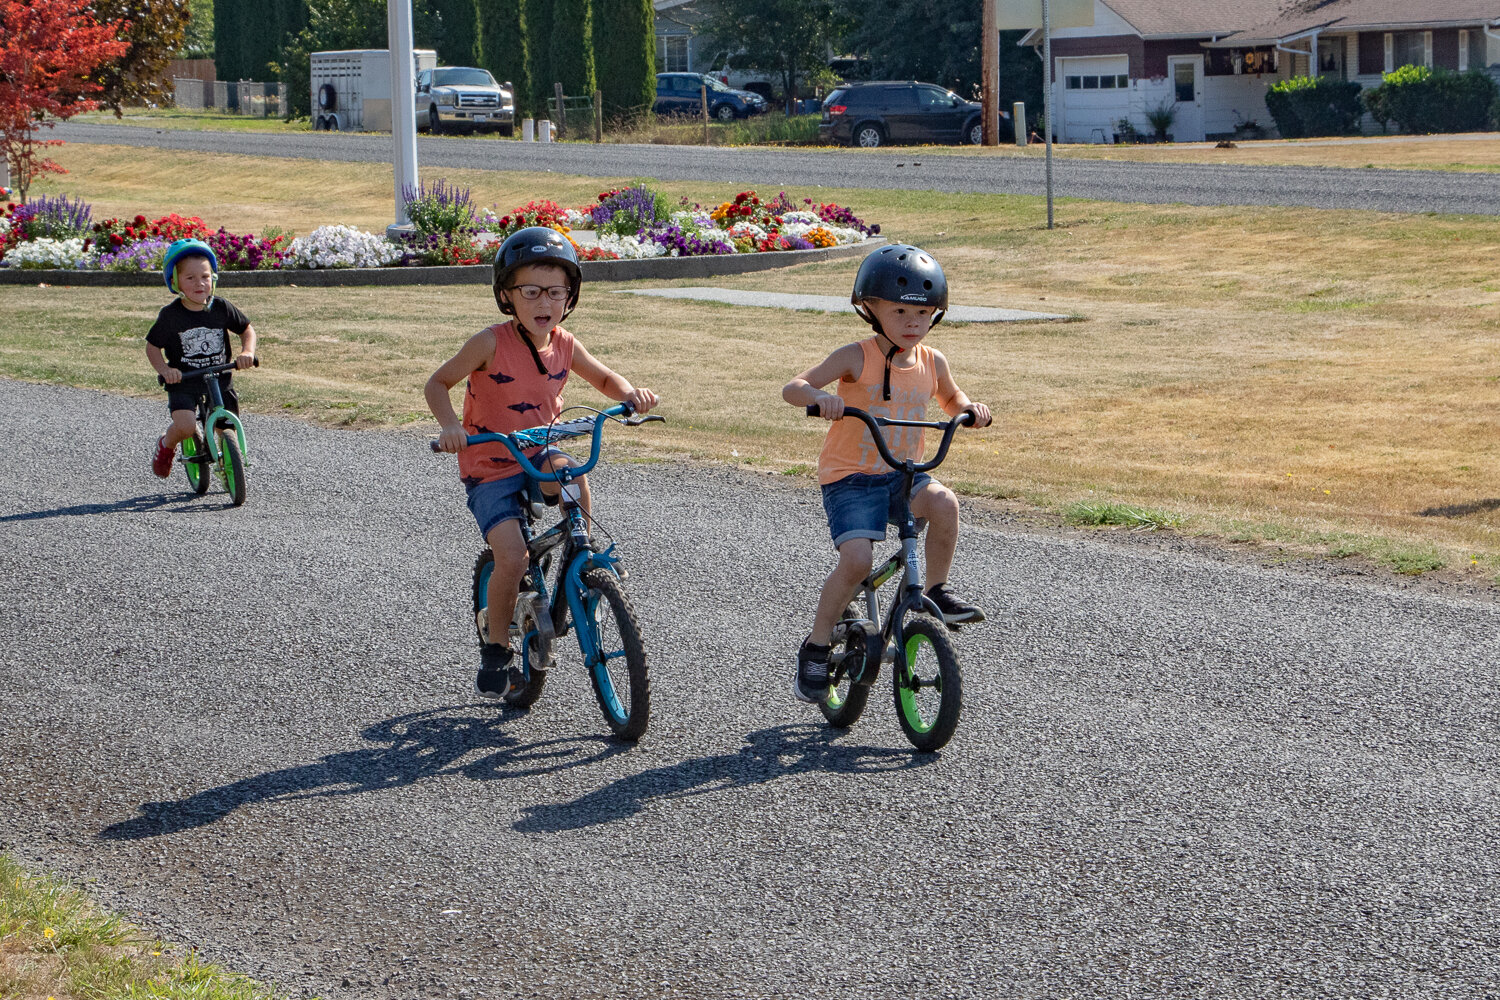 Brothers Leon, right, and Talon Huang race down West Main Street with Jack Wyman racing behind them in Mossyrock during the children's bike races kicking off Mossyrock's Mexican Independence Day celebration on Saturday, Sept. 16.